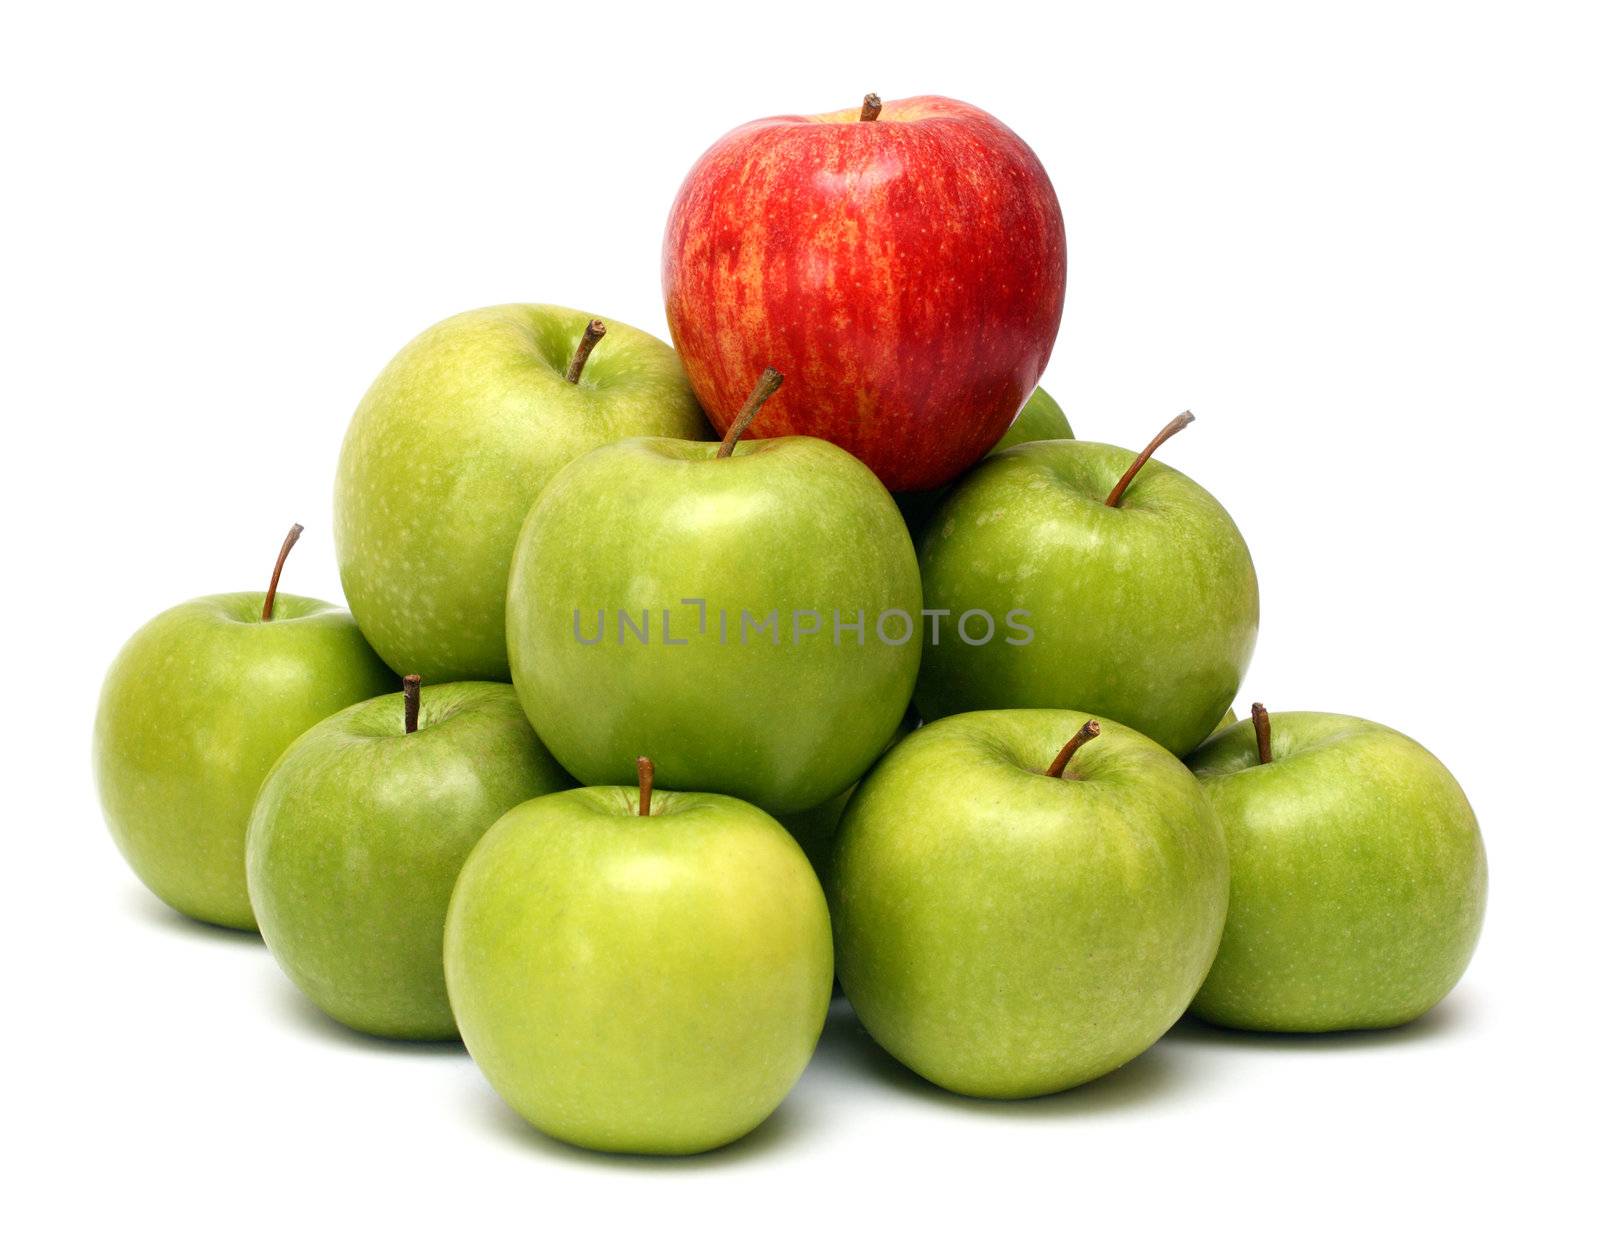 domination concepts - red apple between green apples